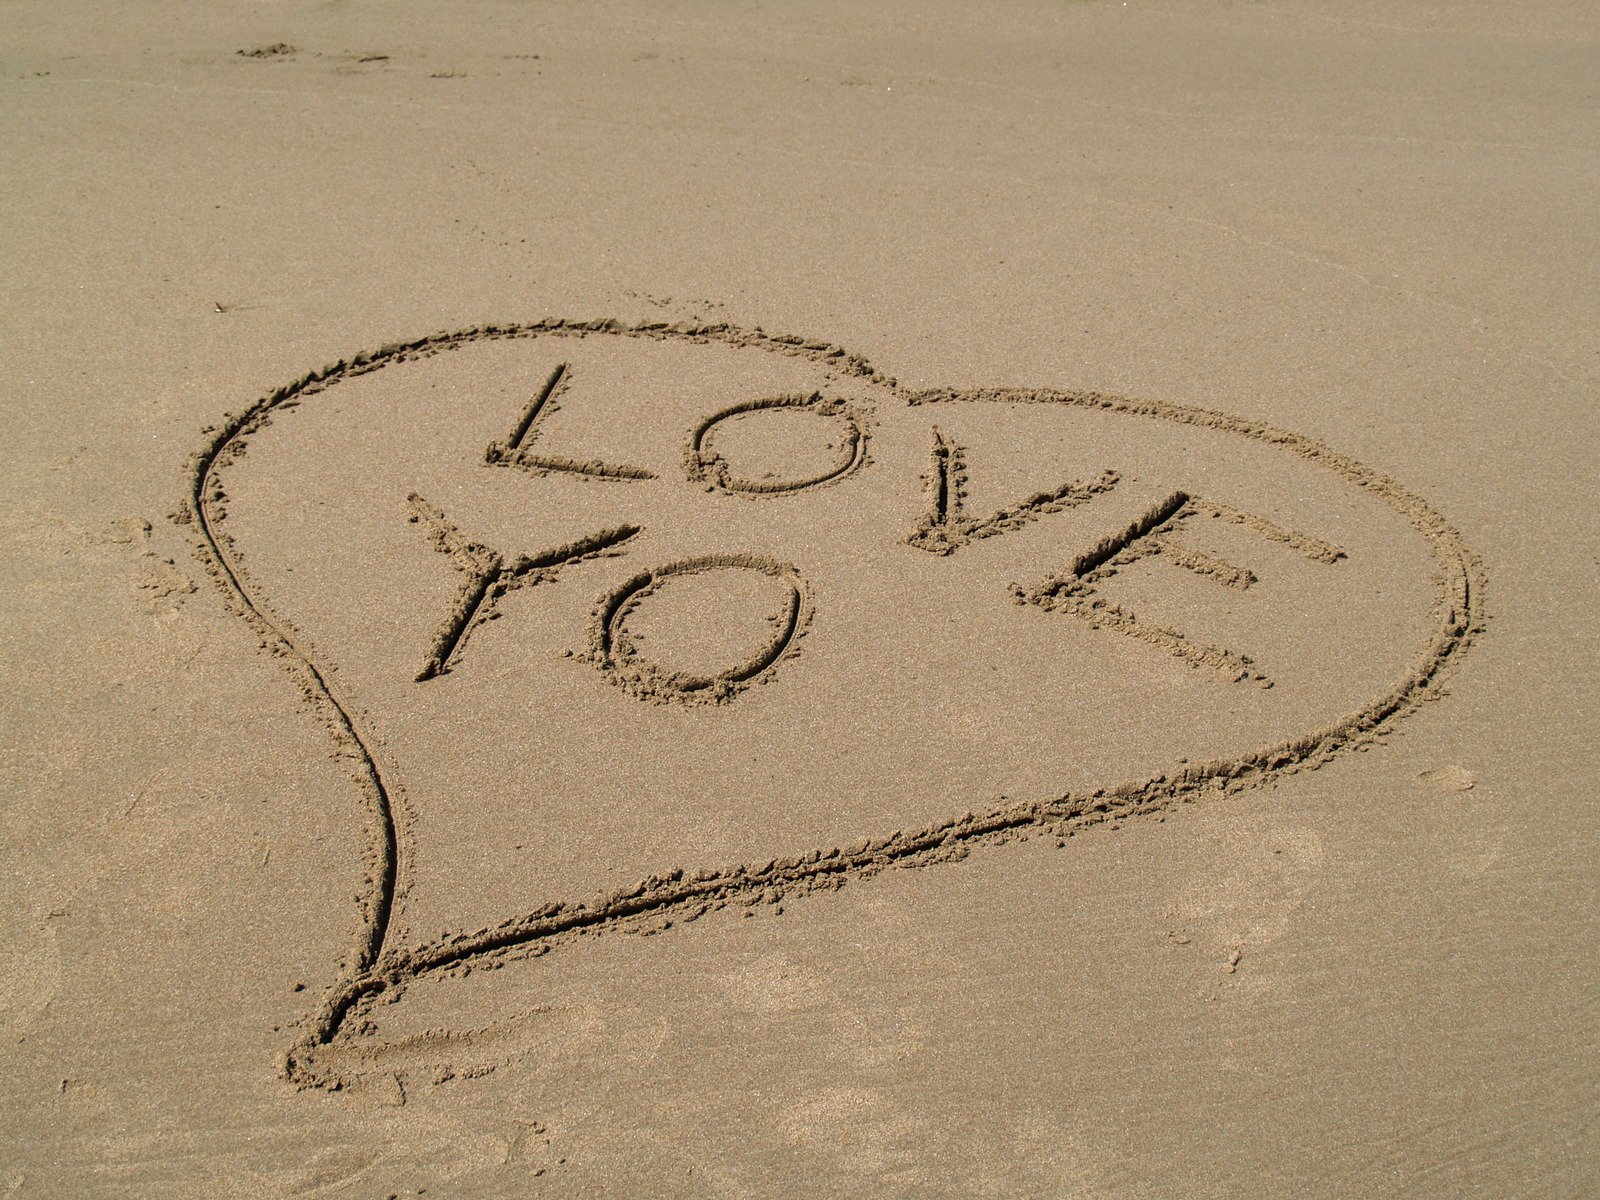 a heart drawn in the sand with the word love you written in it